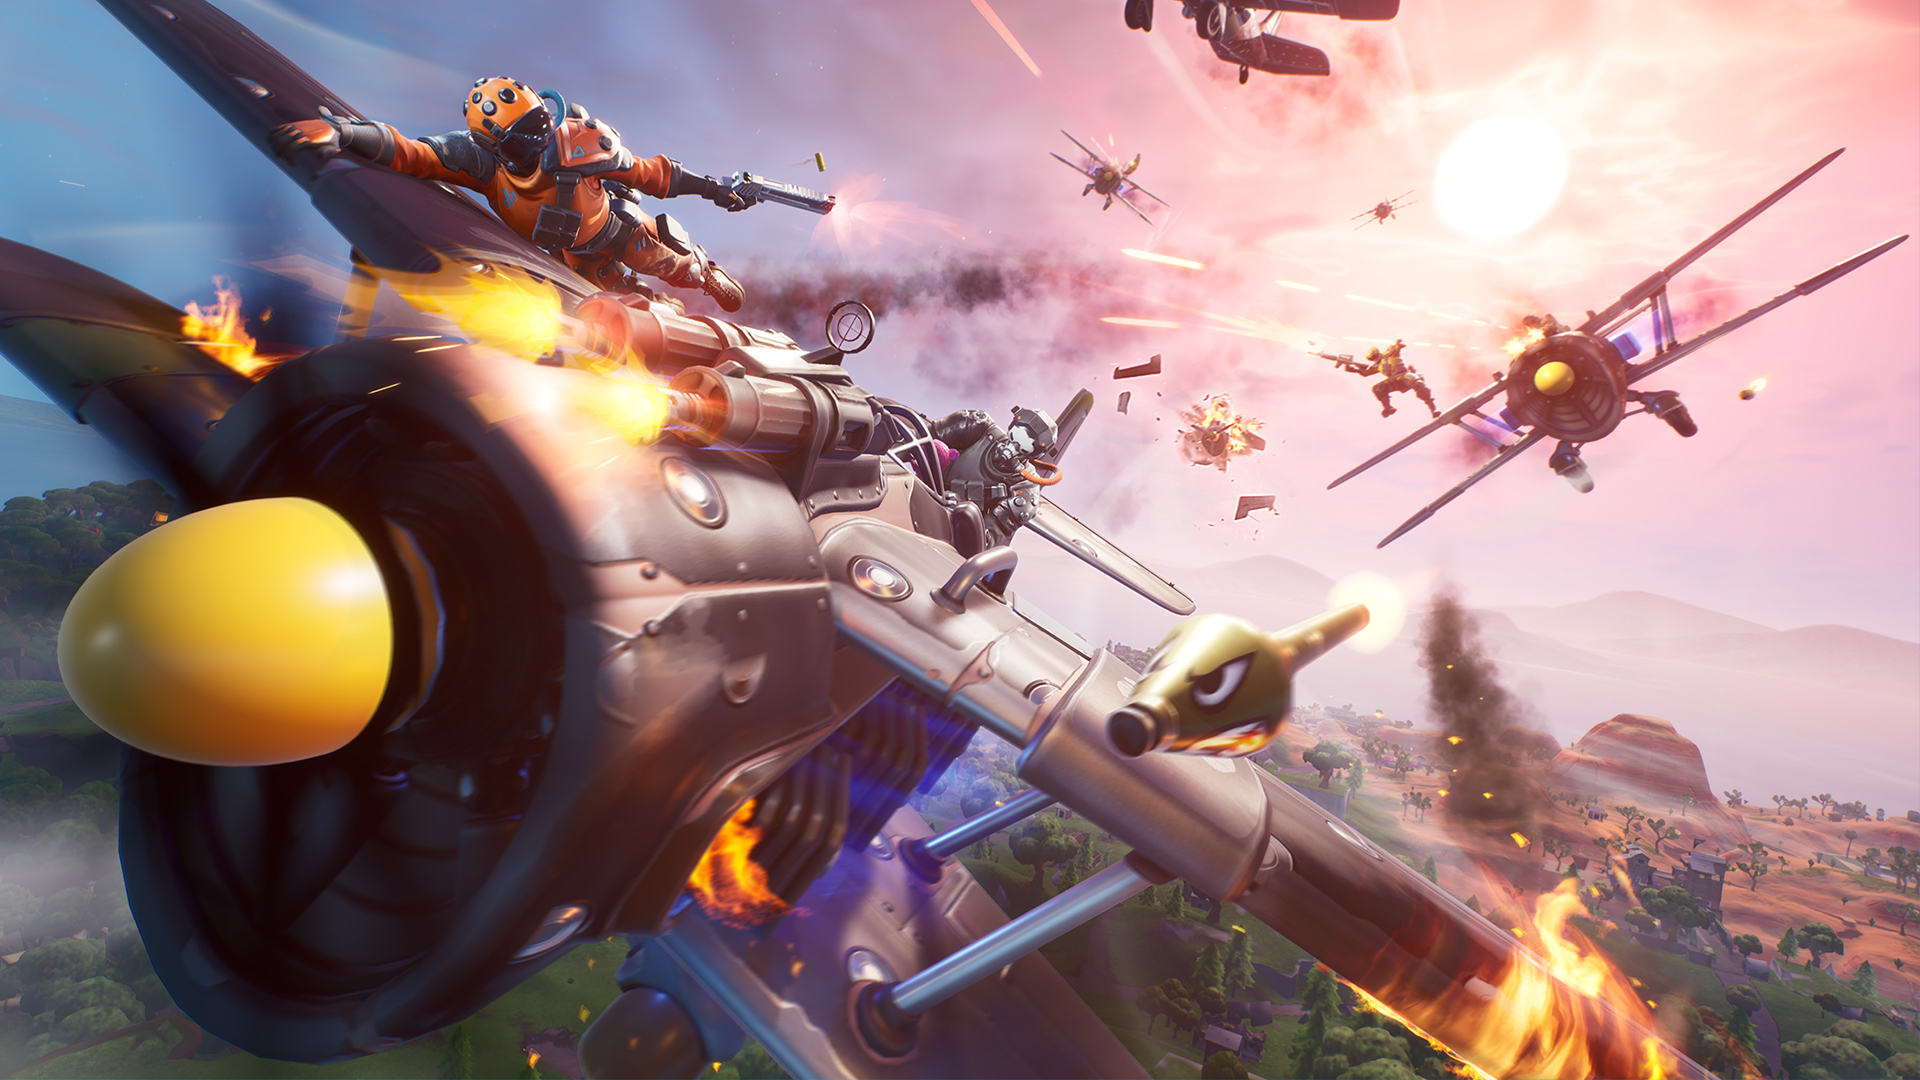 fortnite s air royale mode brings back planes to the game - fortnite back